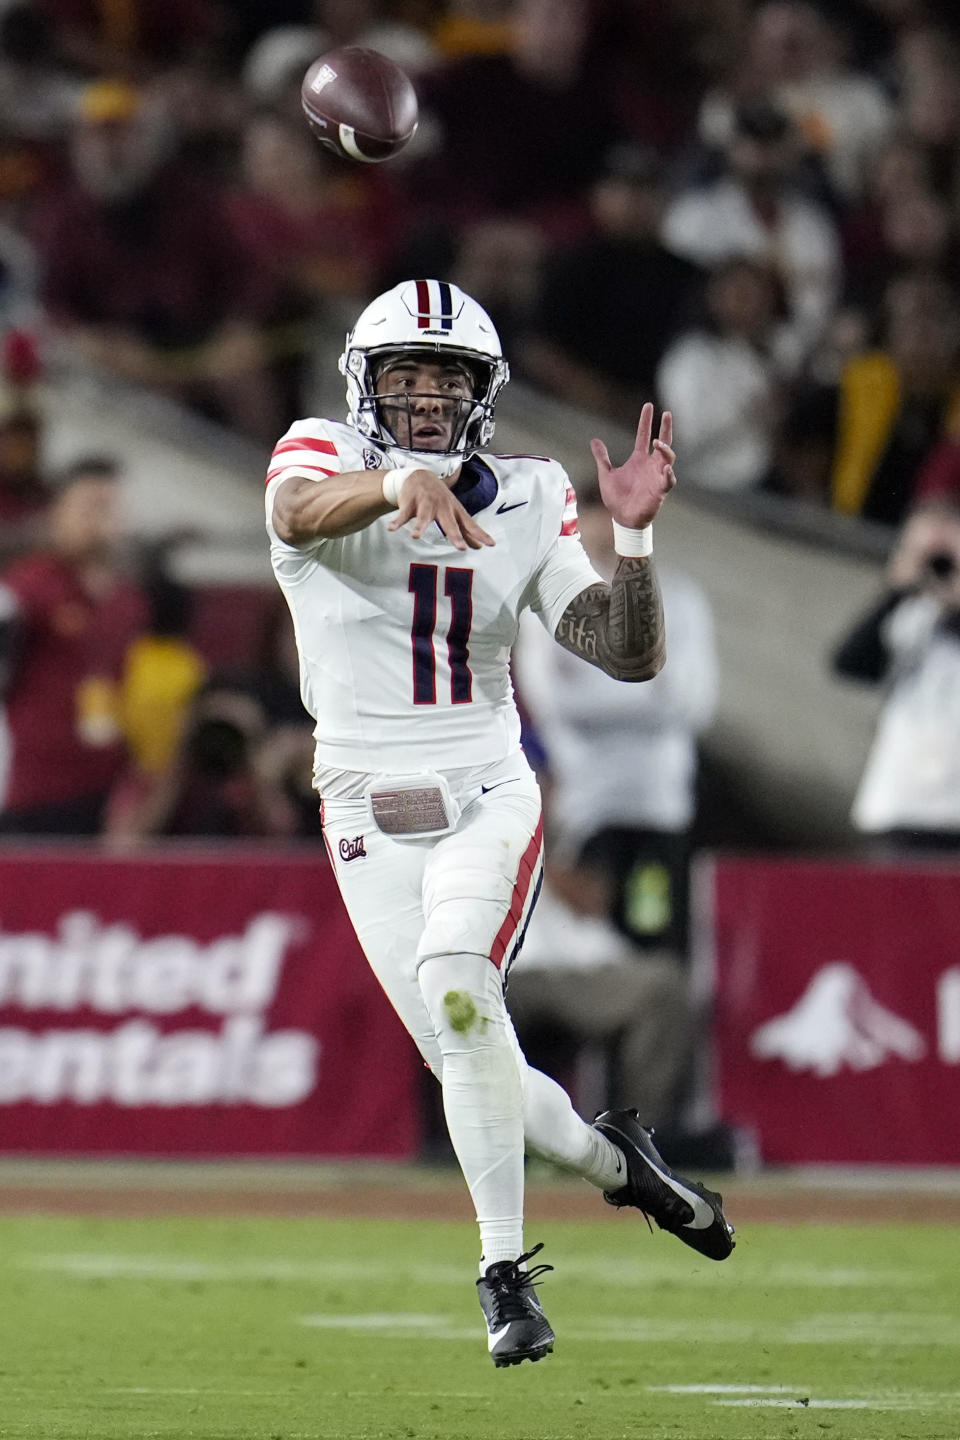 Arizona quarterback Noah Fifita throws a pass against Southern California during the first half of an NCAA college football game Saturday, Oct. 7, 2023, in Los Angeles. (AP Photo/Marcio Jose Sanchez)